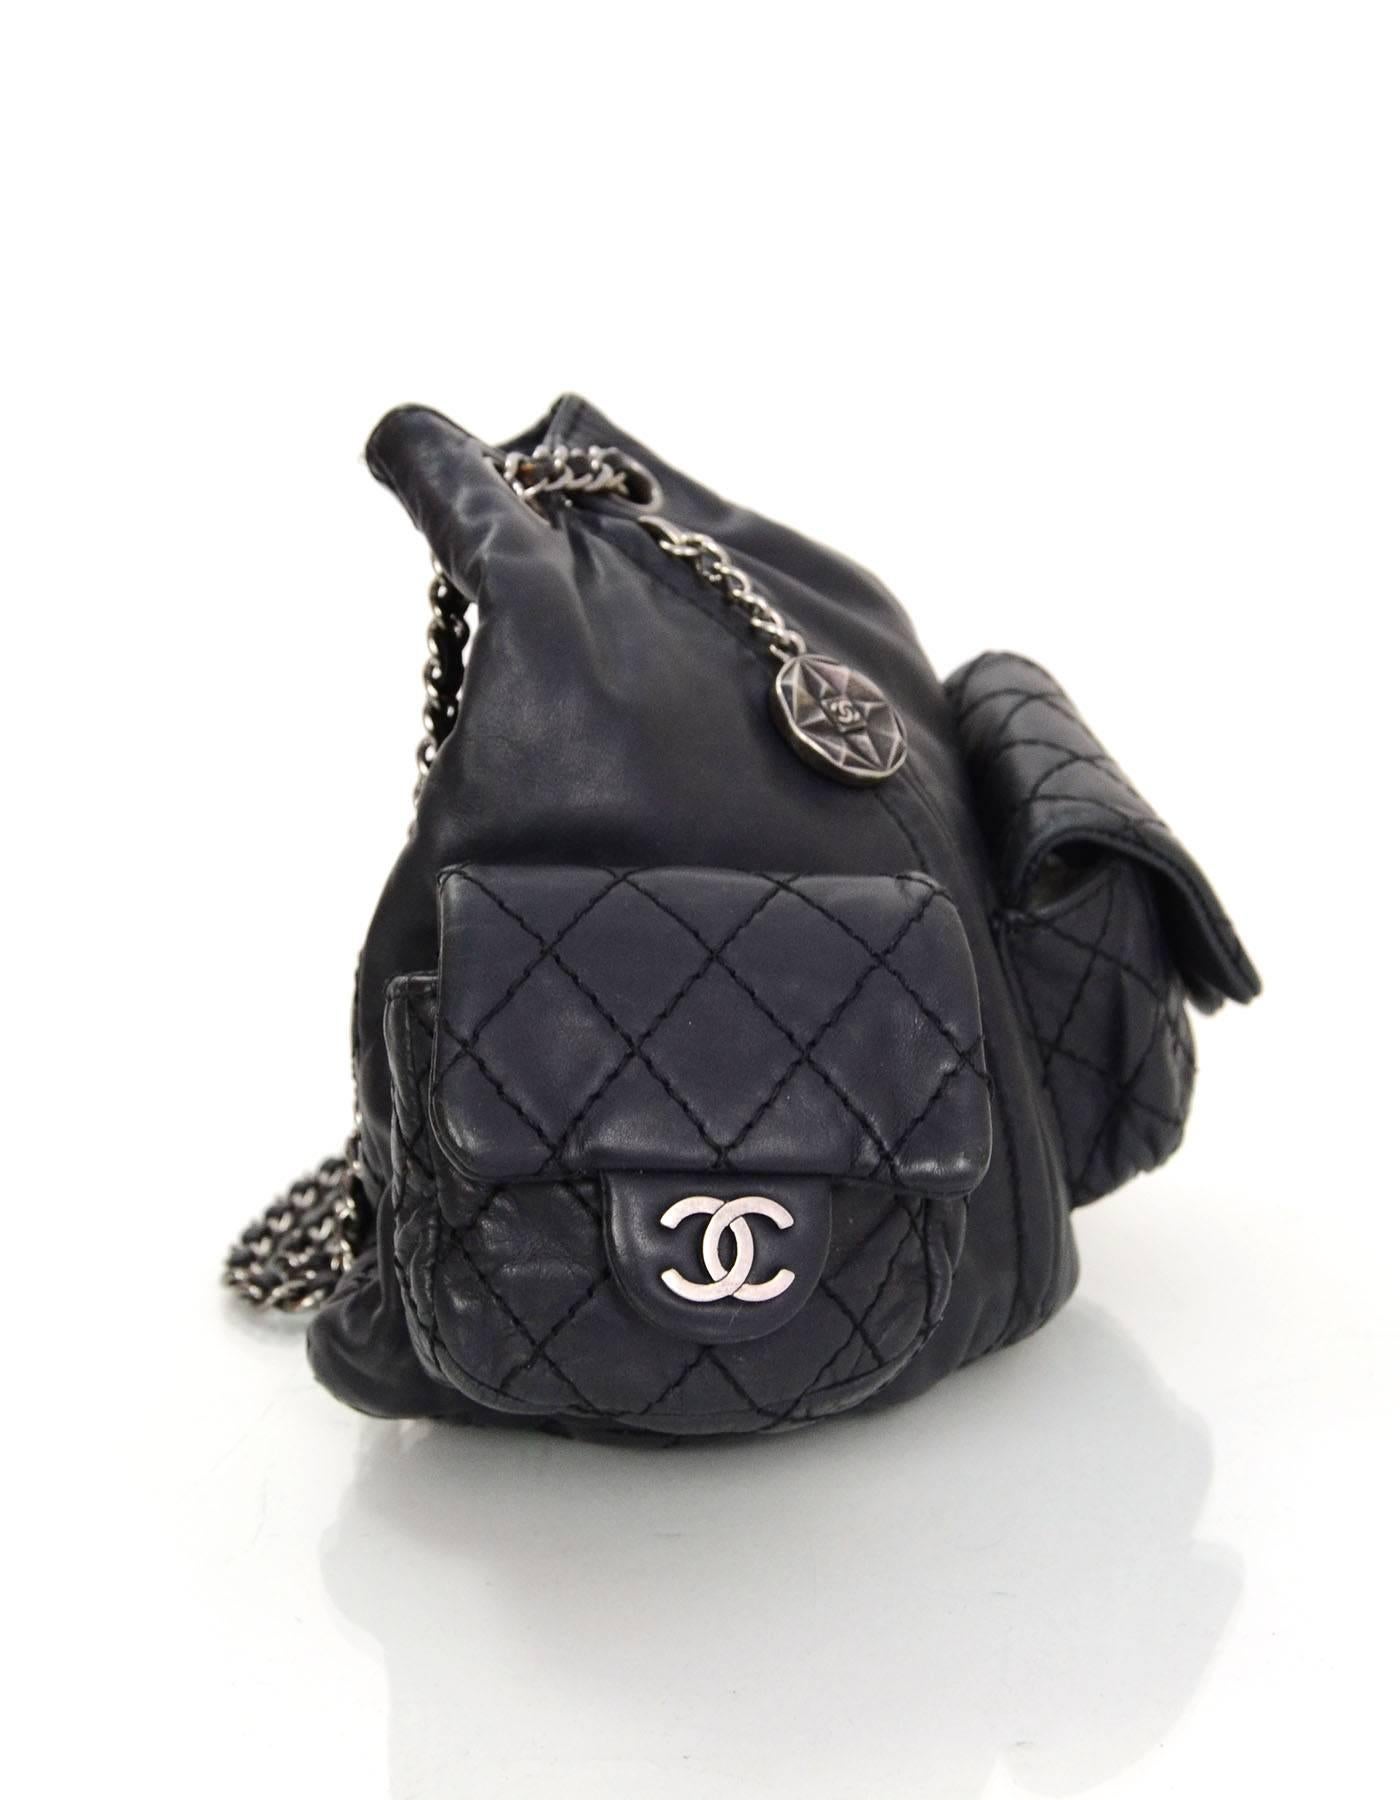 Chanel Black Quilted Mini 'Backpack is Back' Bag 
Features CC charm at front zipper pull and two CC pendants on pockets

Made In: Italy
Year of Production: 2012
Color: Black
Hardware: Oxidized silvertone
Materials: Calfskin leather
Lining: Black